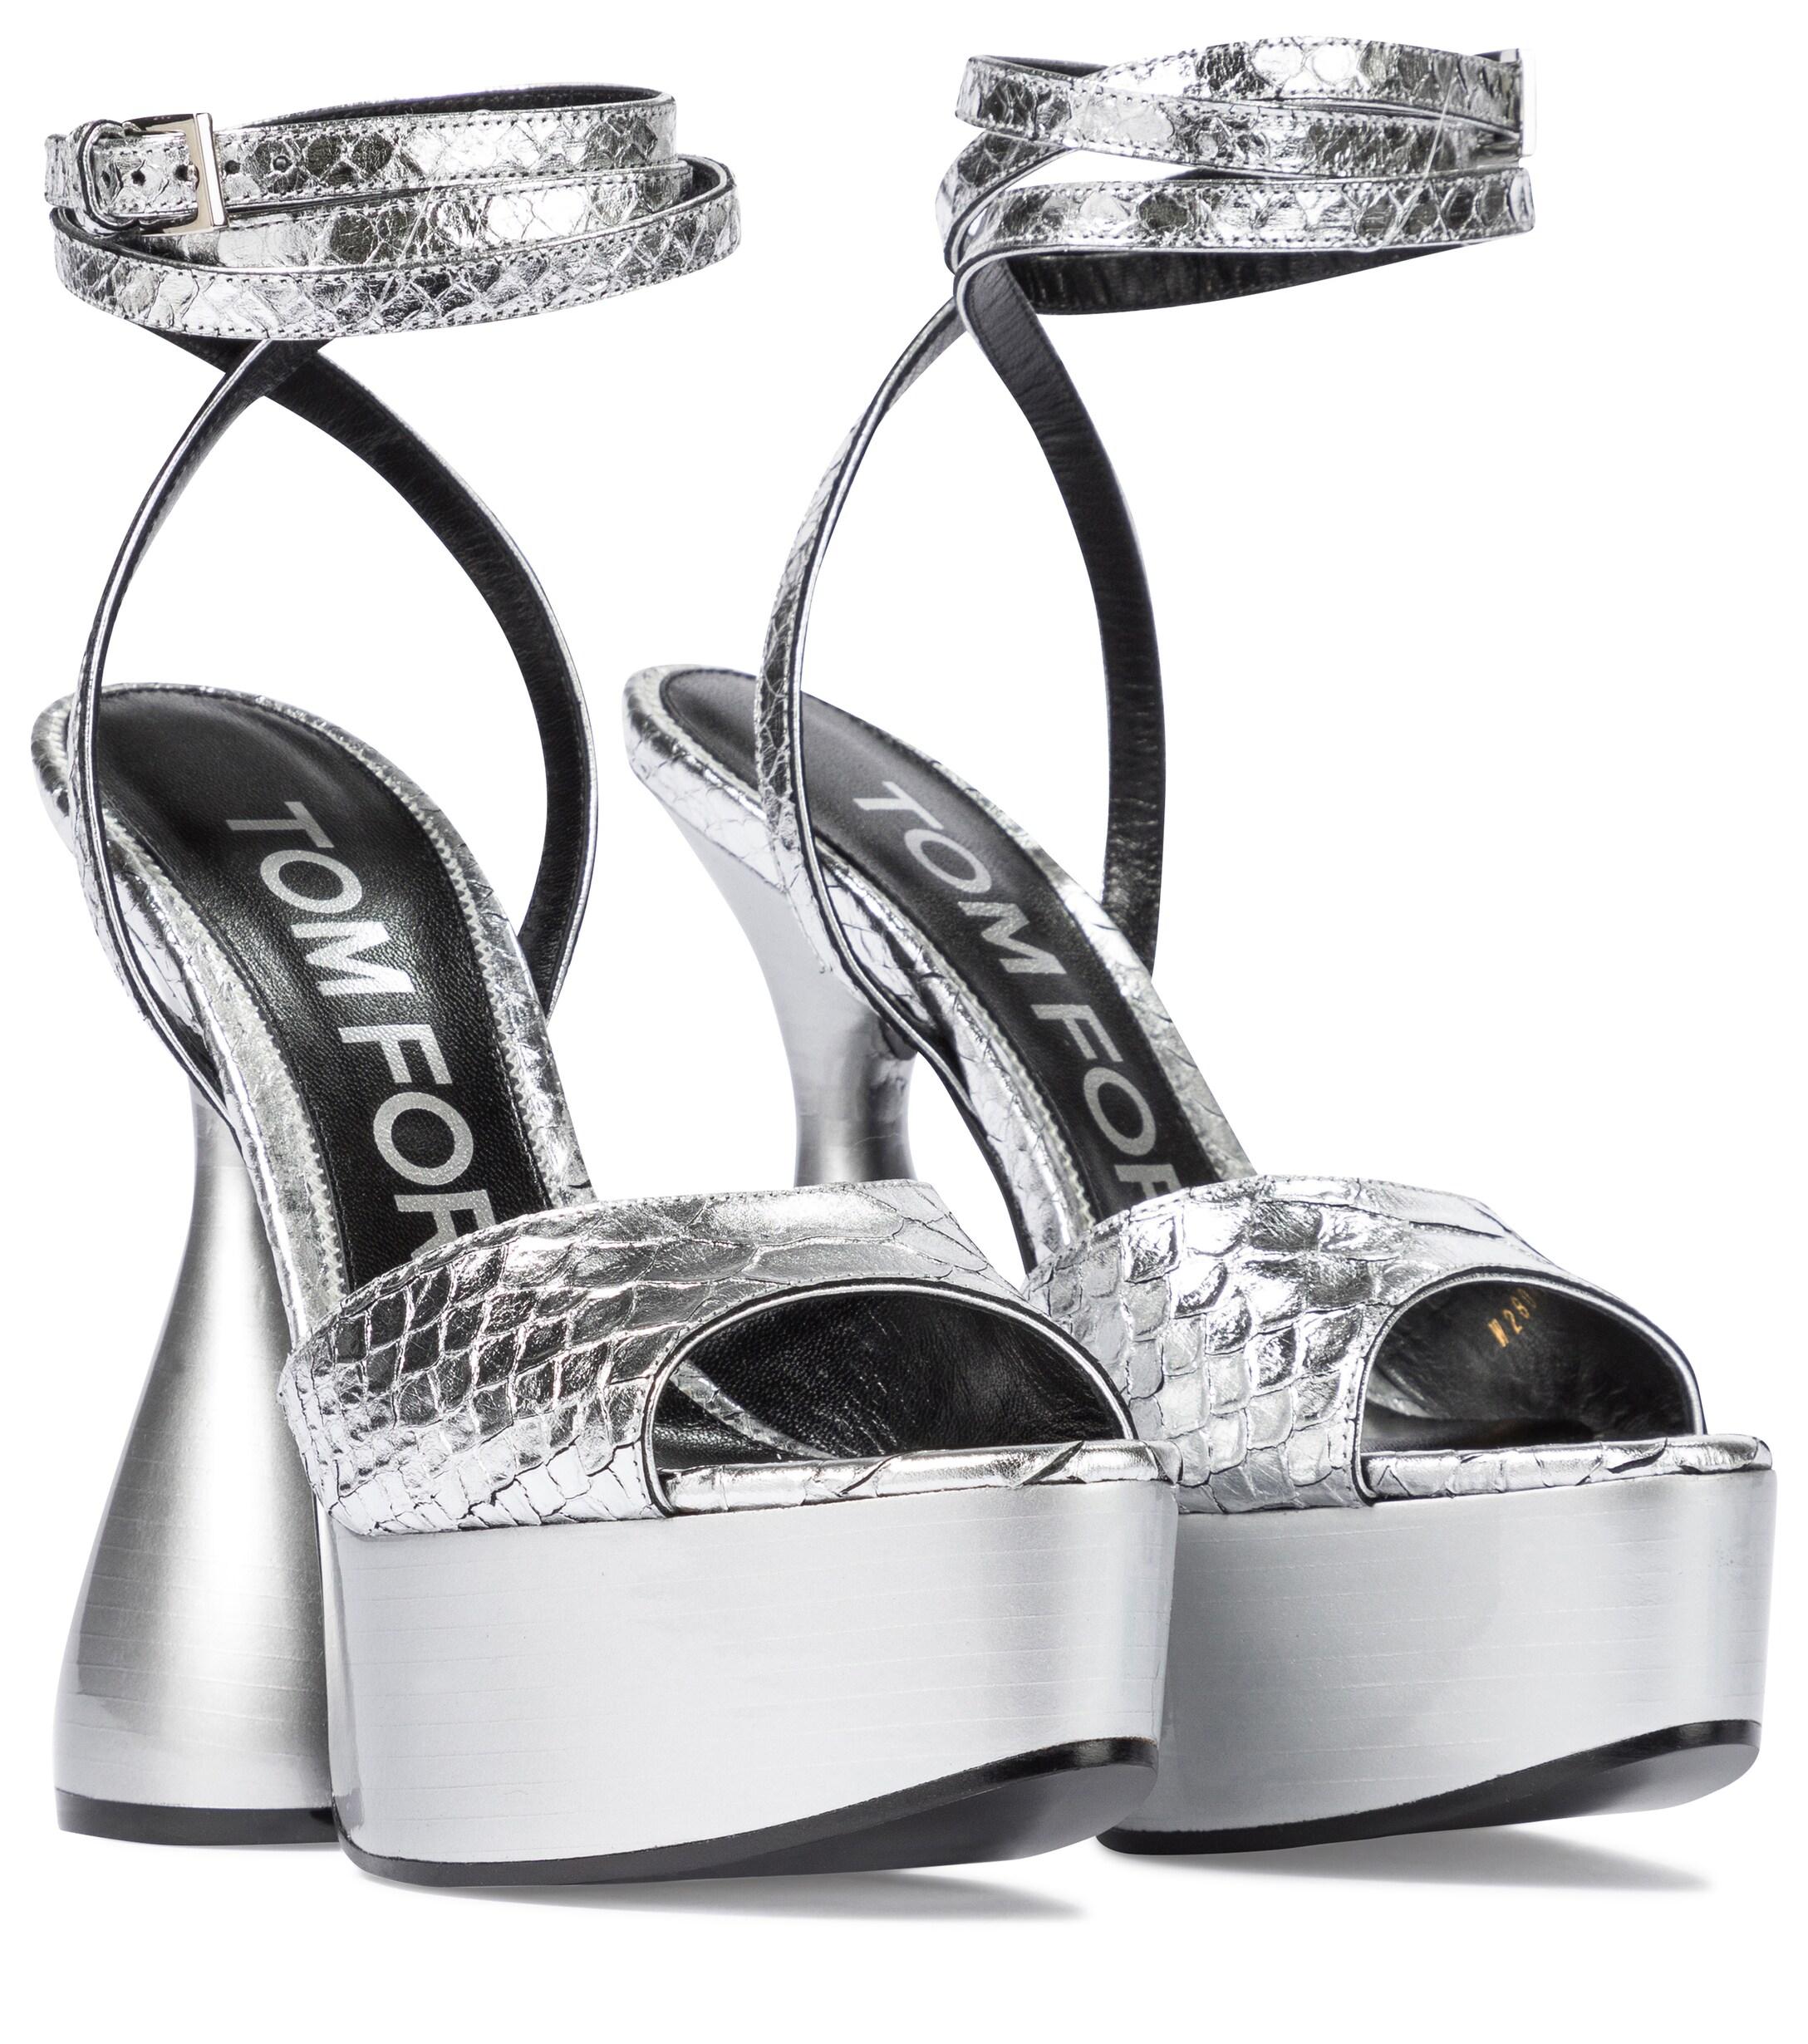 Tom Ford Disco Leather Platform Sandals in Silver (Metallic) - Lyst